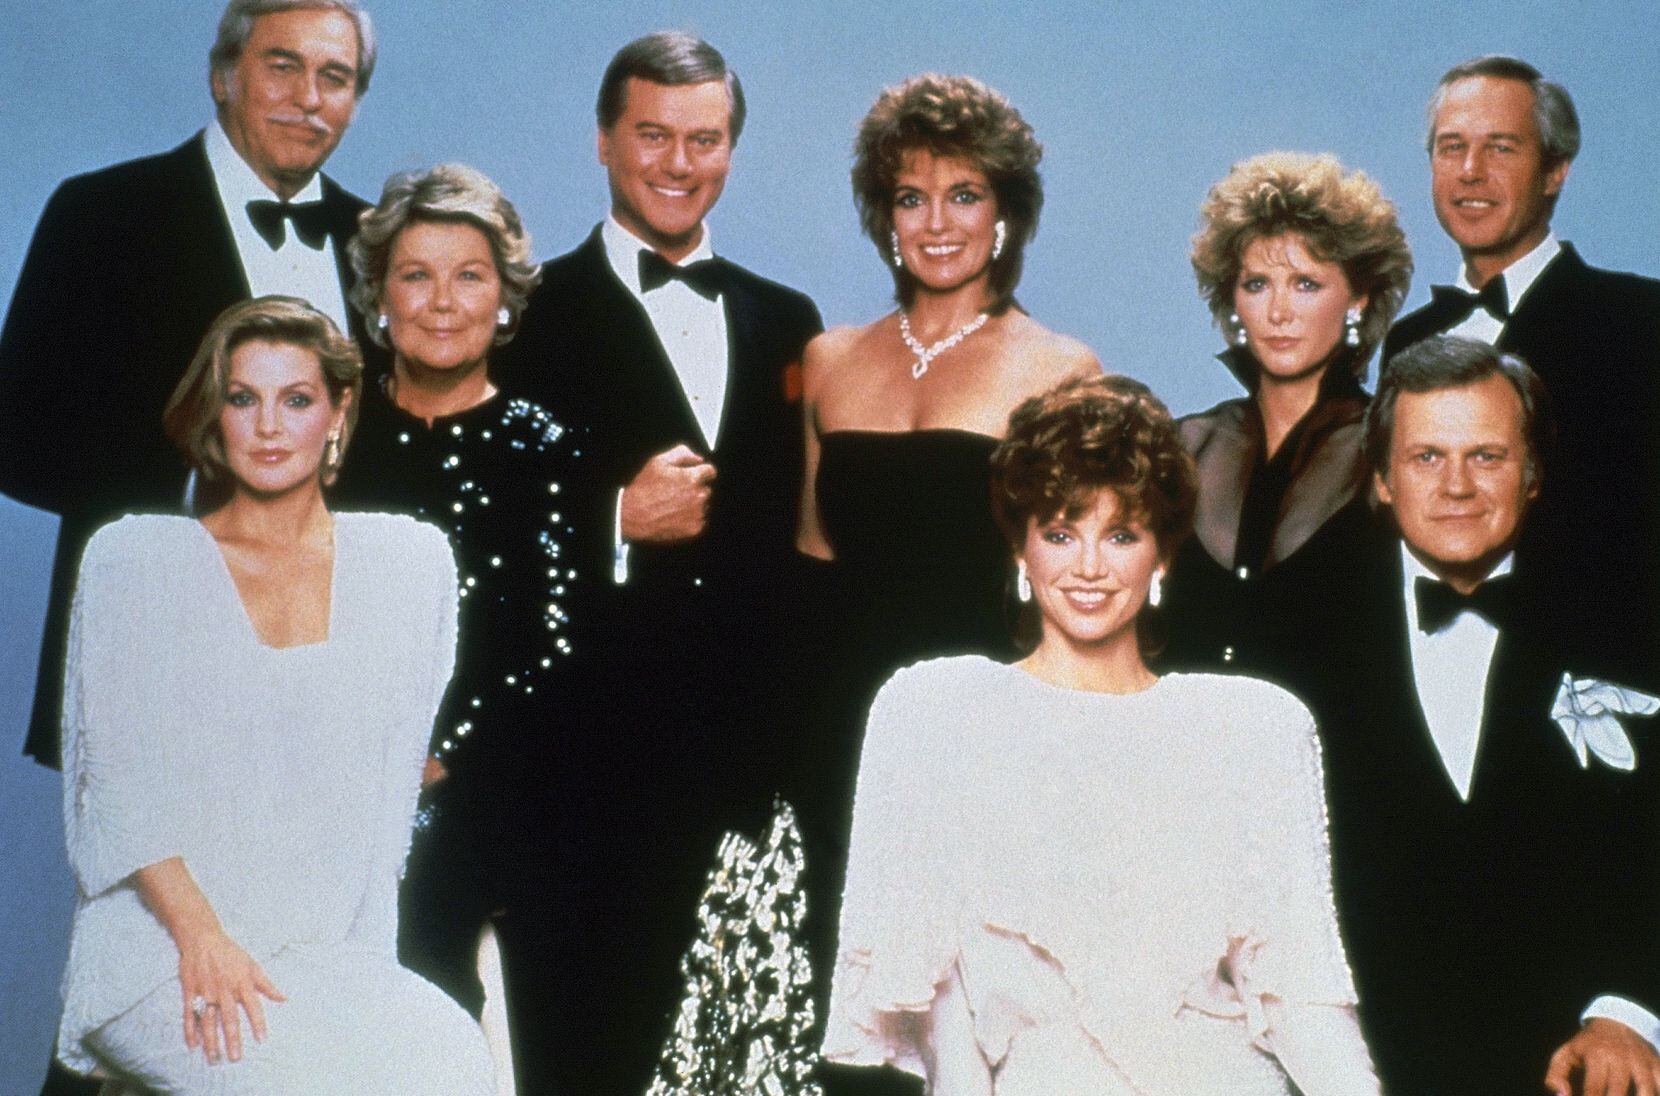 This 1983 photo shows the cast of the TV show "Dallas," including actor Larry Hagman, center...